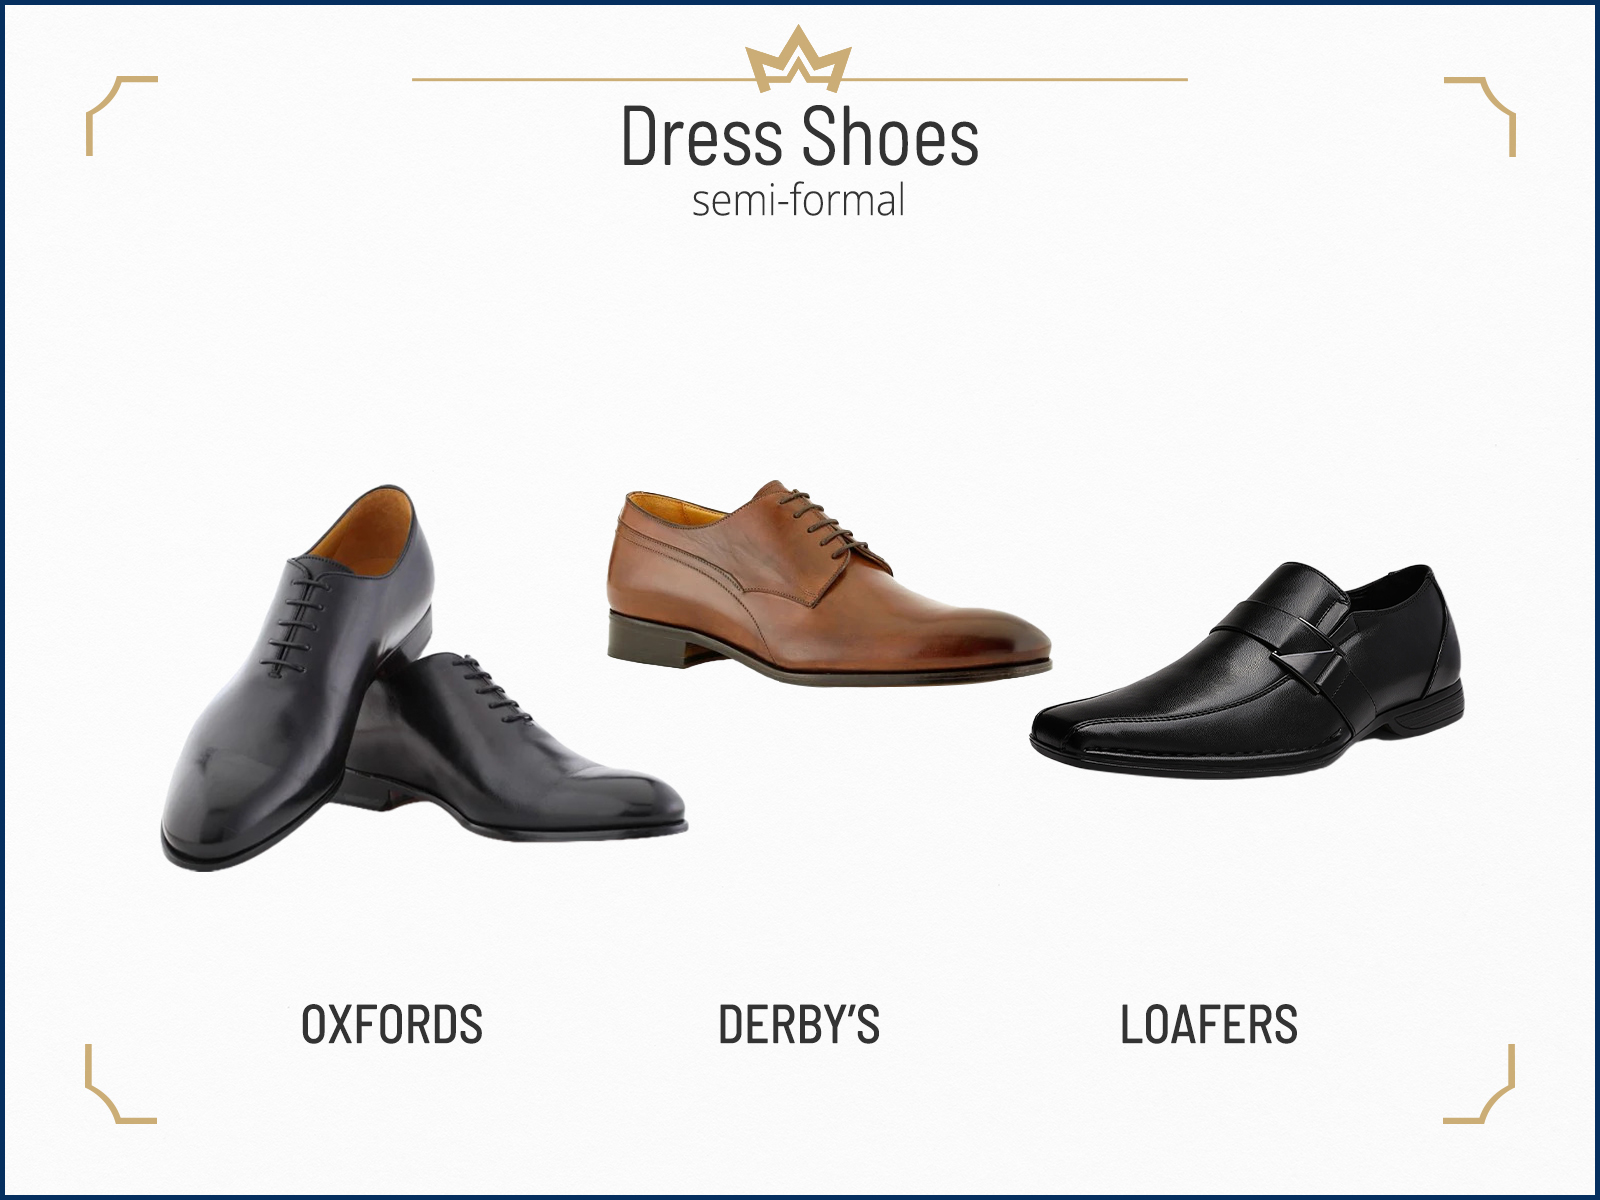 Recommended dress shoe types for semi-formal events